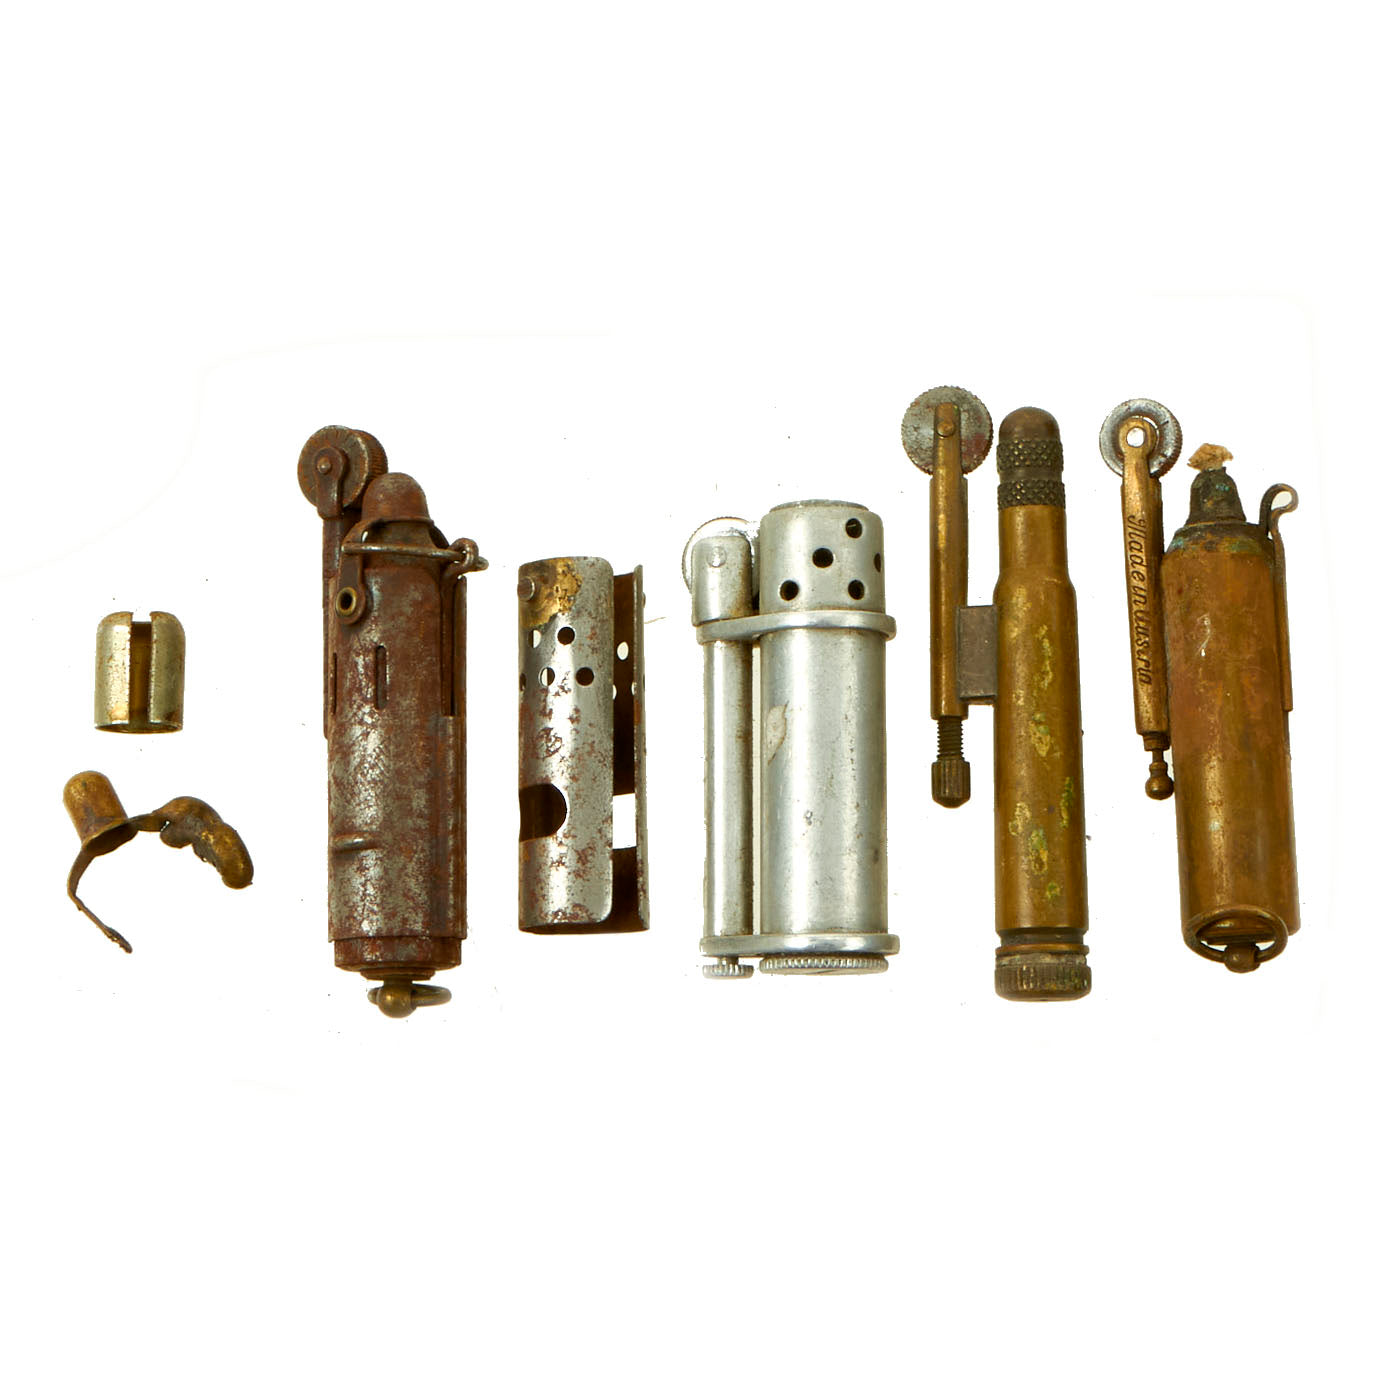 Original U.S. WWII Trench Lighter Collection - 4 Lighters International Military Antiques